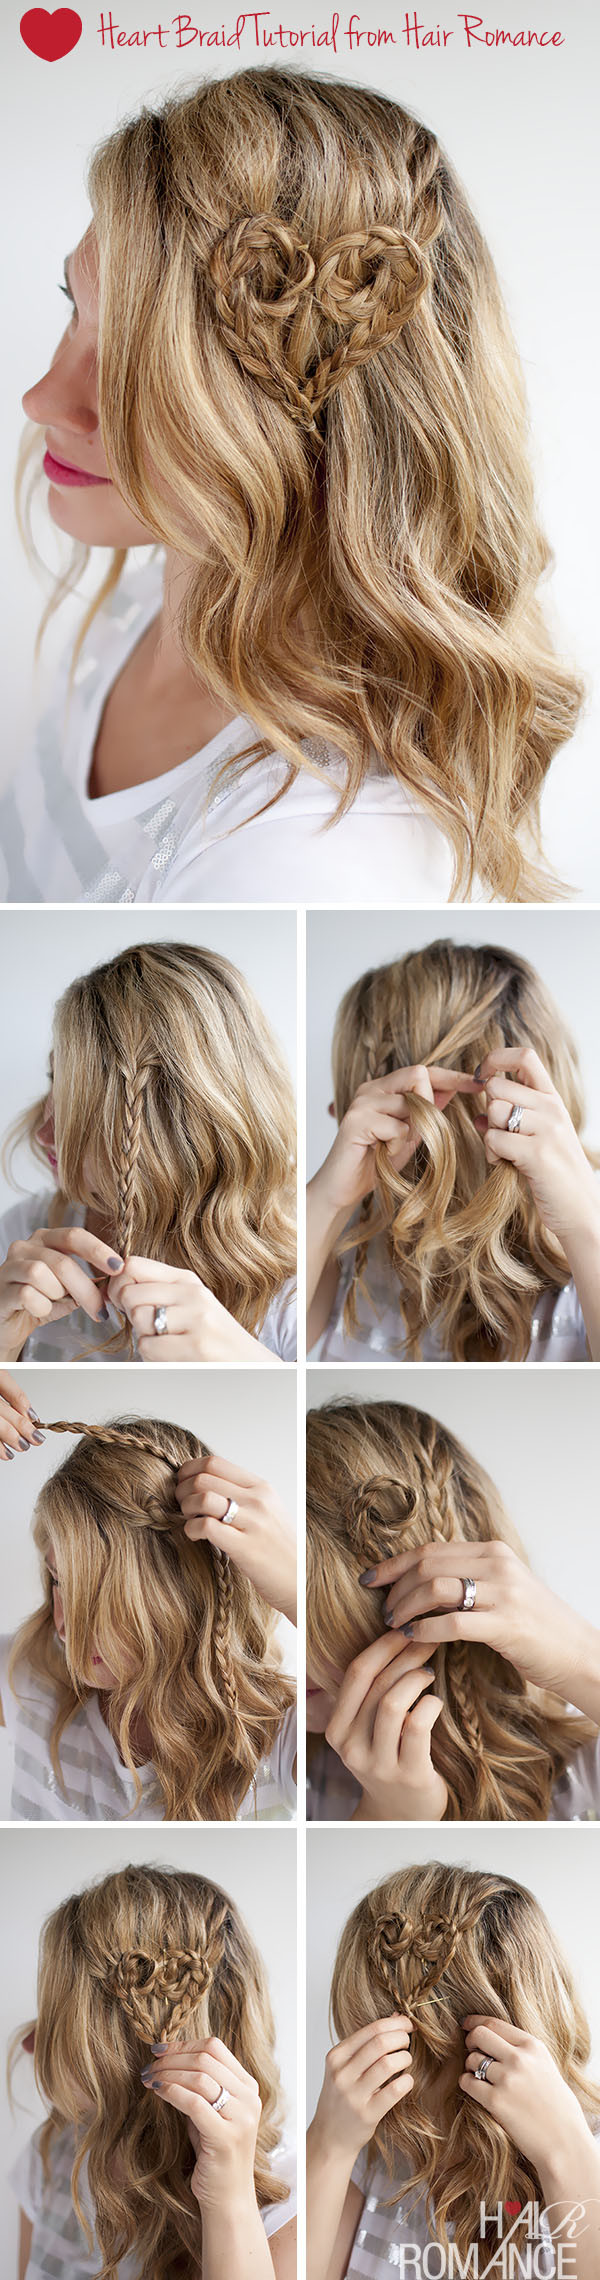 Easy Heart Hairstyles
 Easy To Make Valentine s Day Hairstyles You Will Fall In